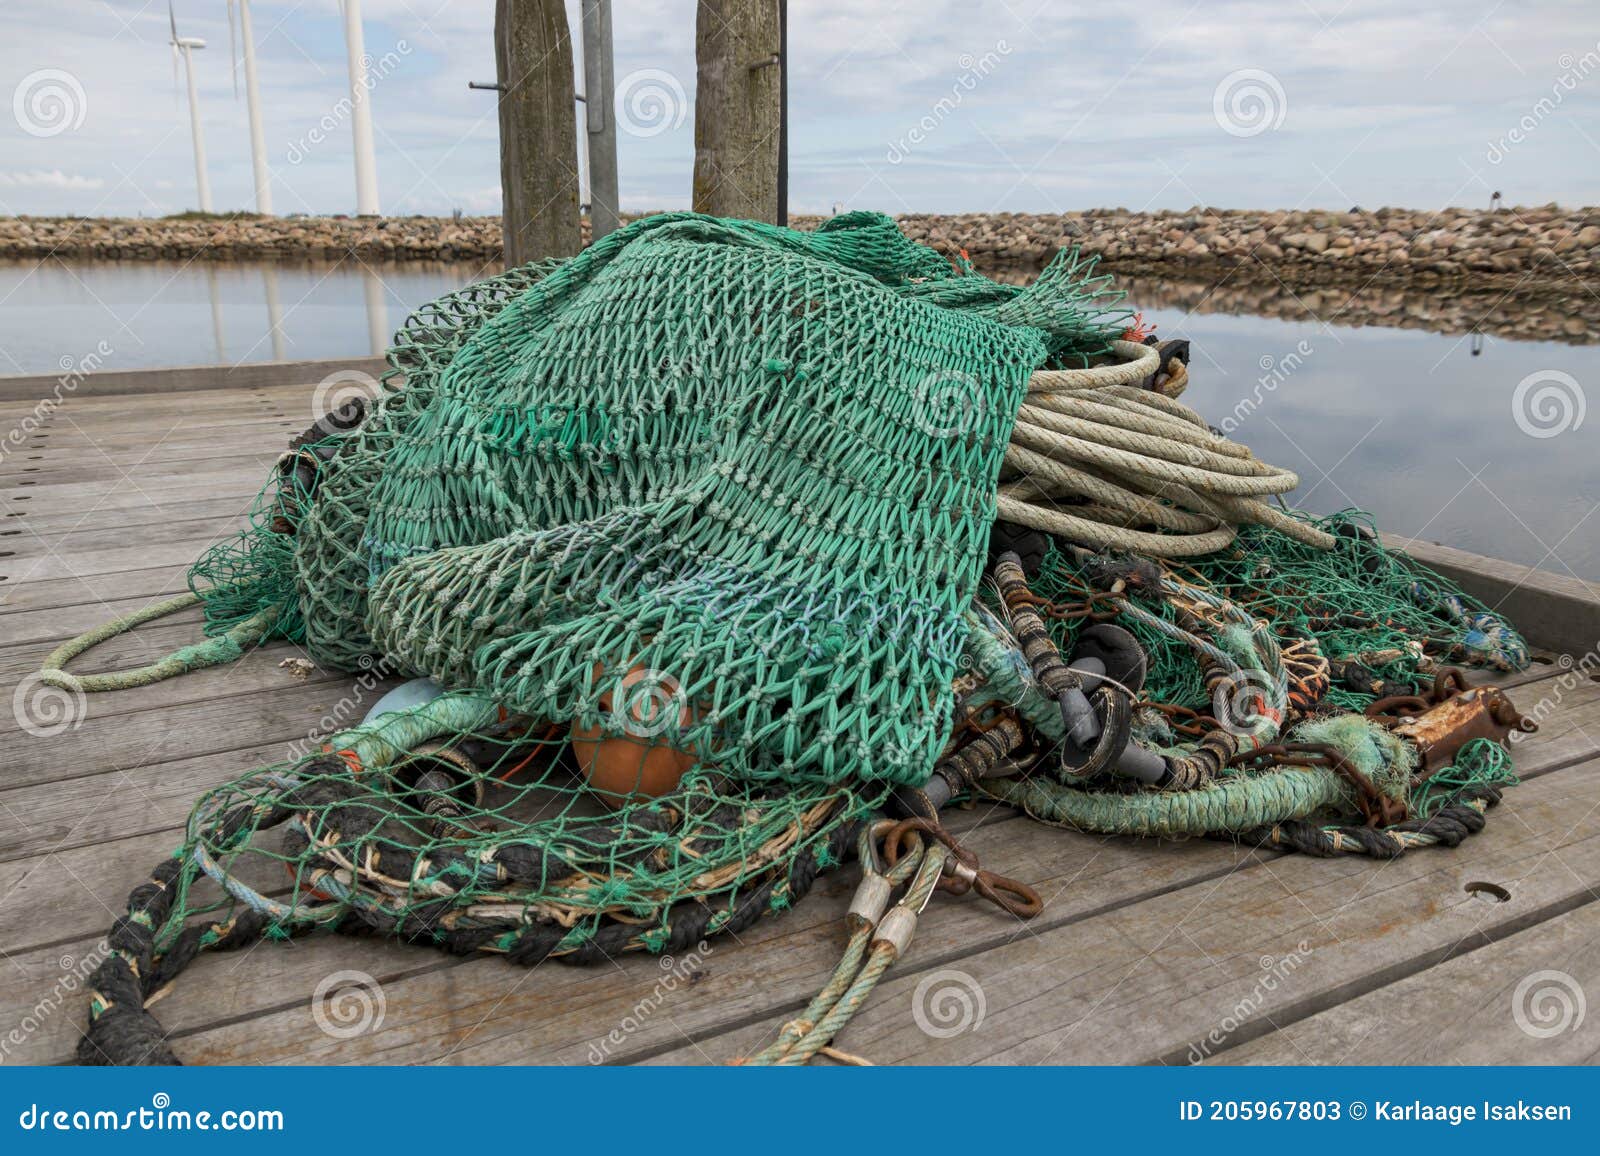 Equipment for a Fishing Cutter, Equipment for Fishing from a Fishing Boat,  Fishing Nets and Fishing Equipment are on Land Ready To Stock Image - Image  of equipment, marine: 205967803